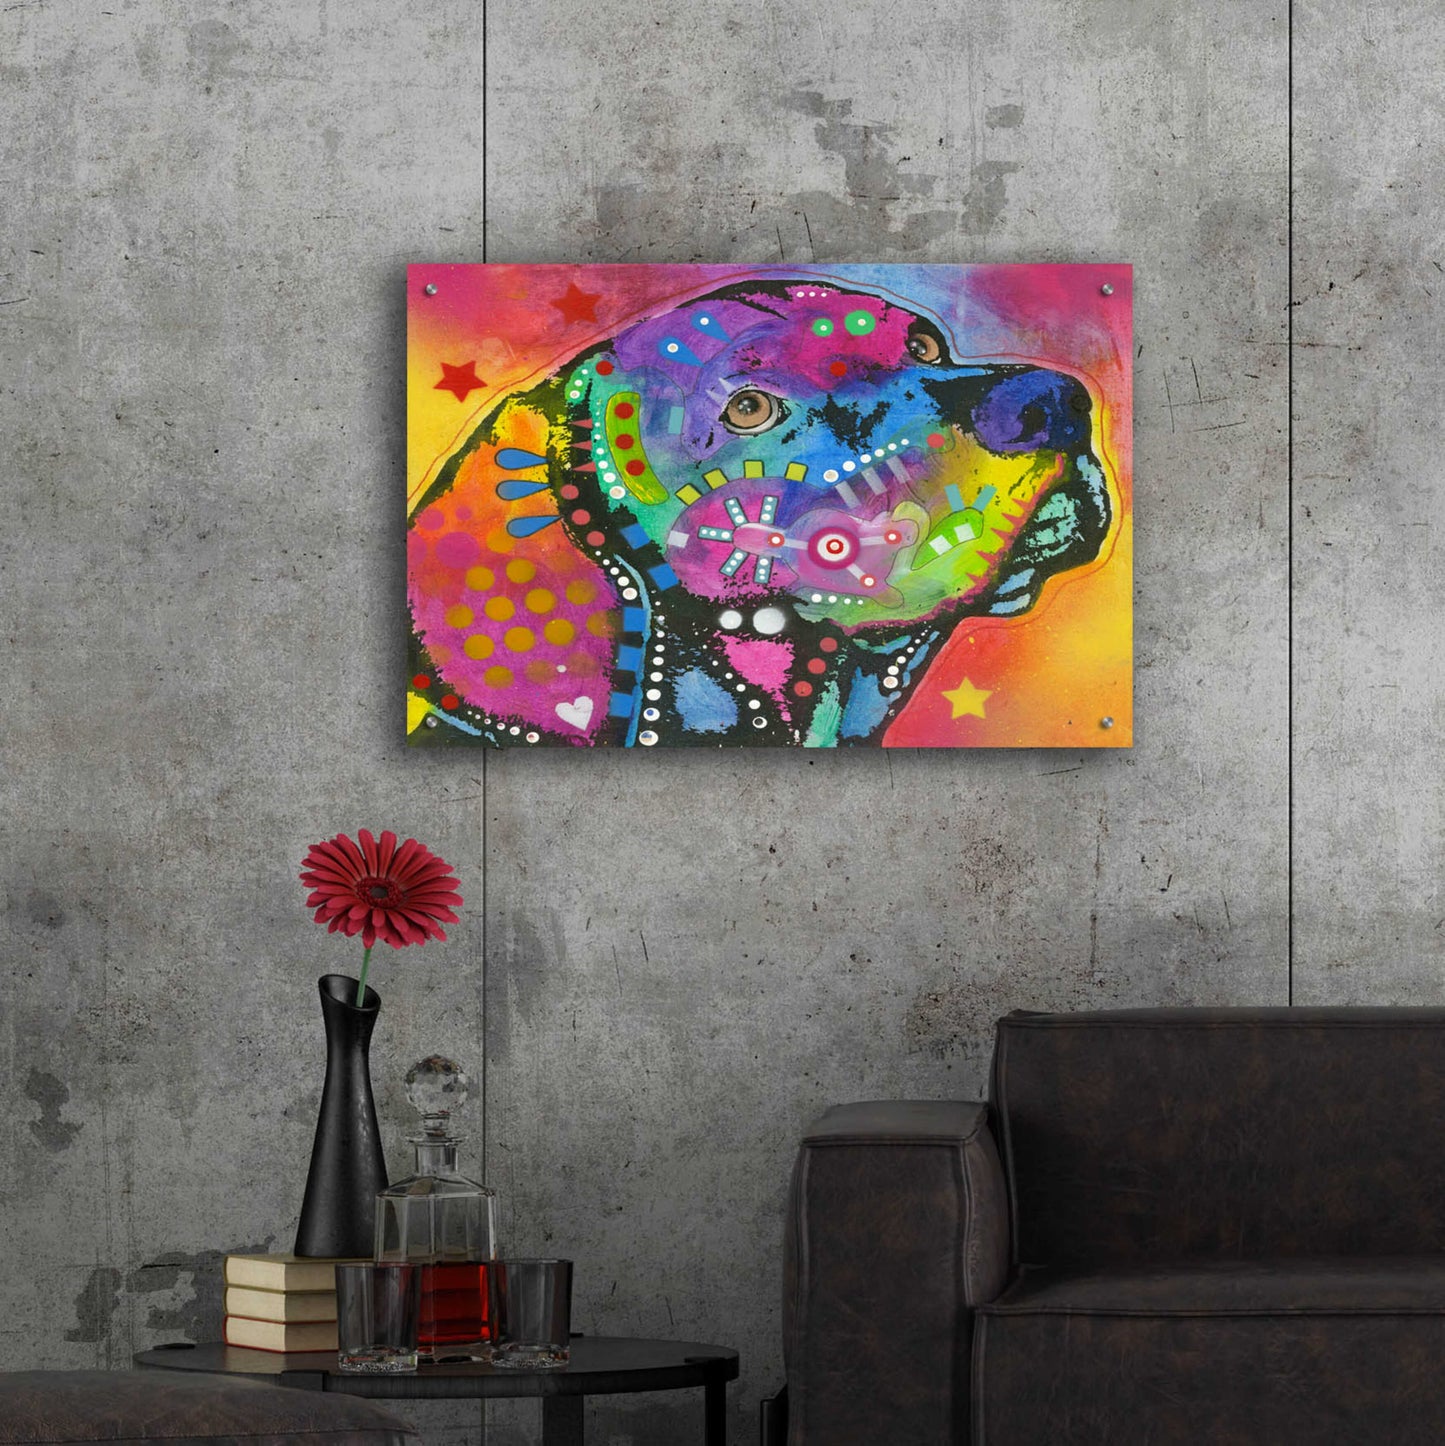 Epic Art 'Psychedelic Lab' by Dean Russo, Acrylic Glass Wall Art,36x24